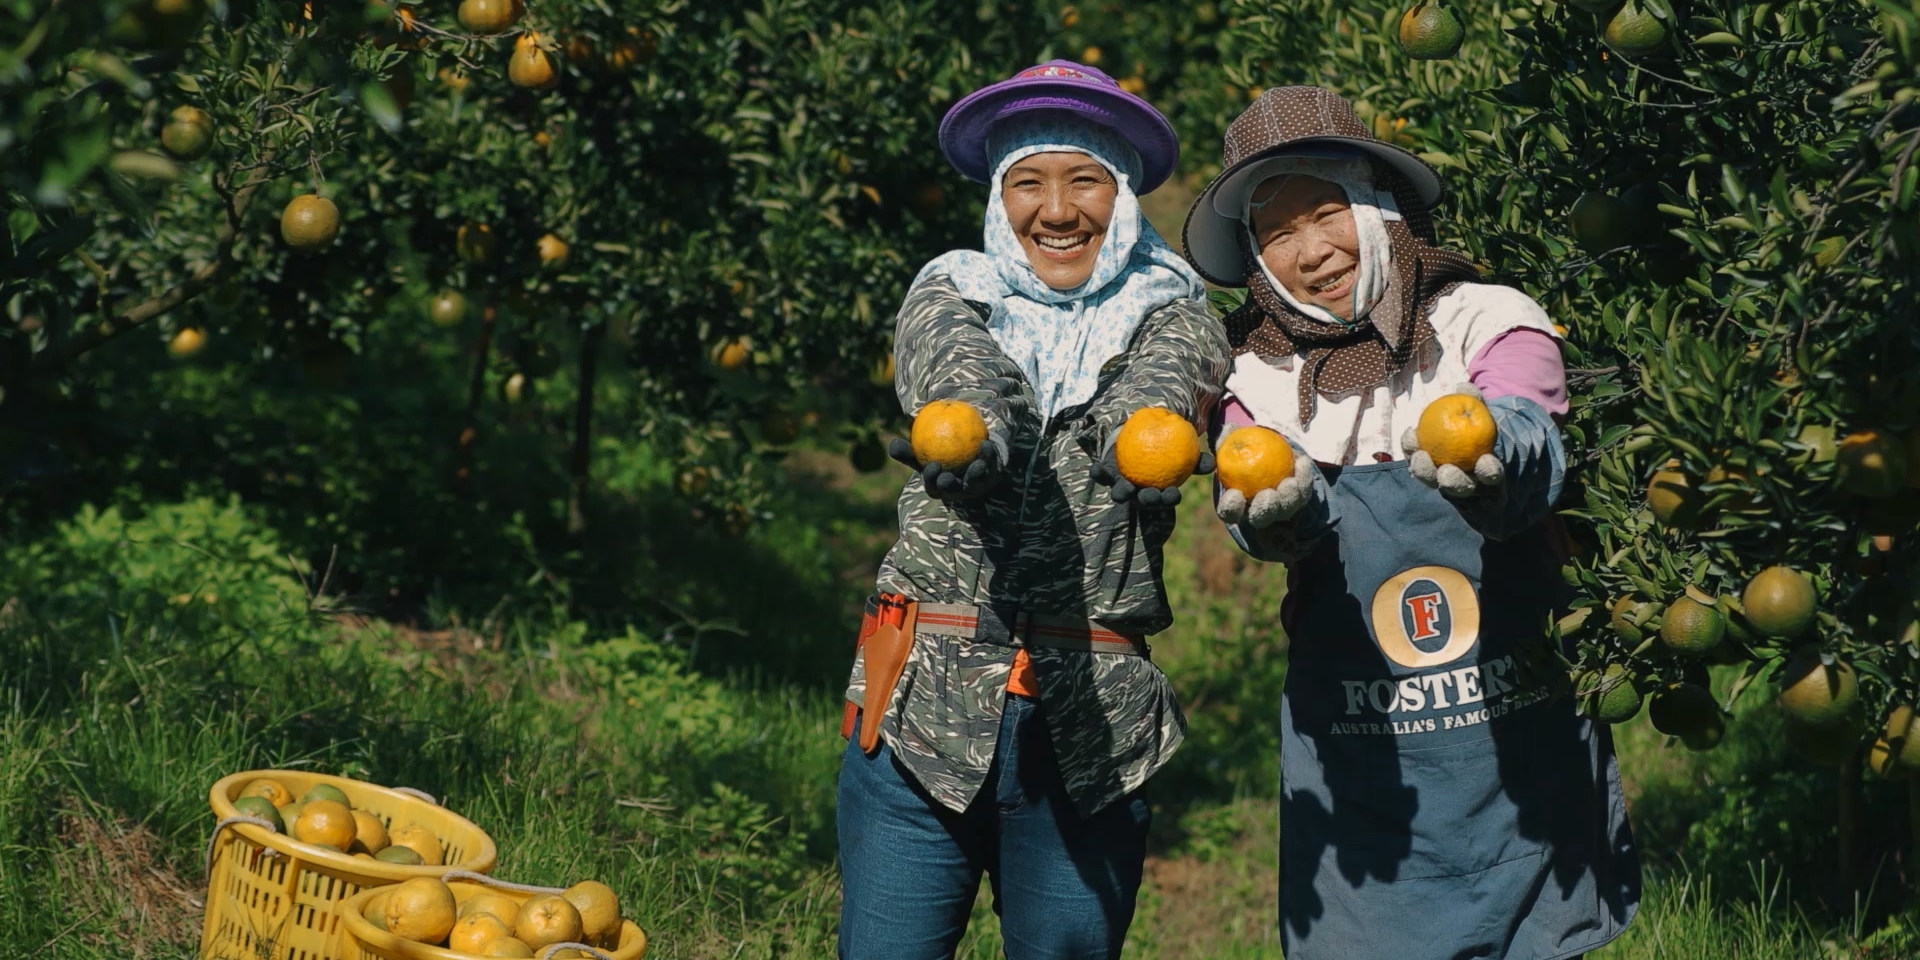 As their family and friend, we want to share the joy of an abundant harvest with them.